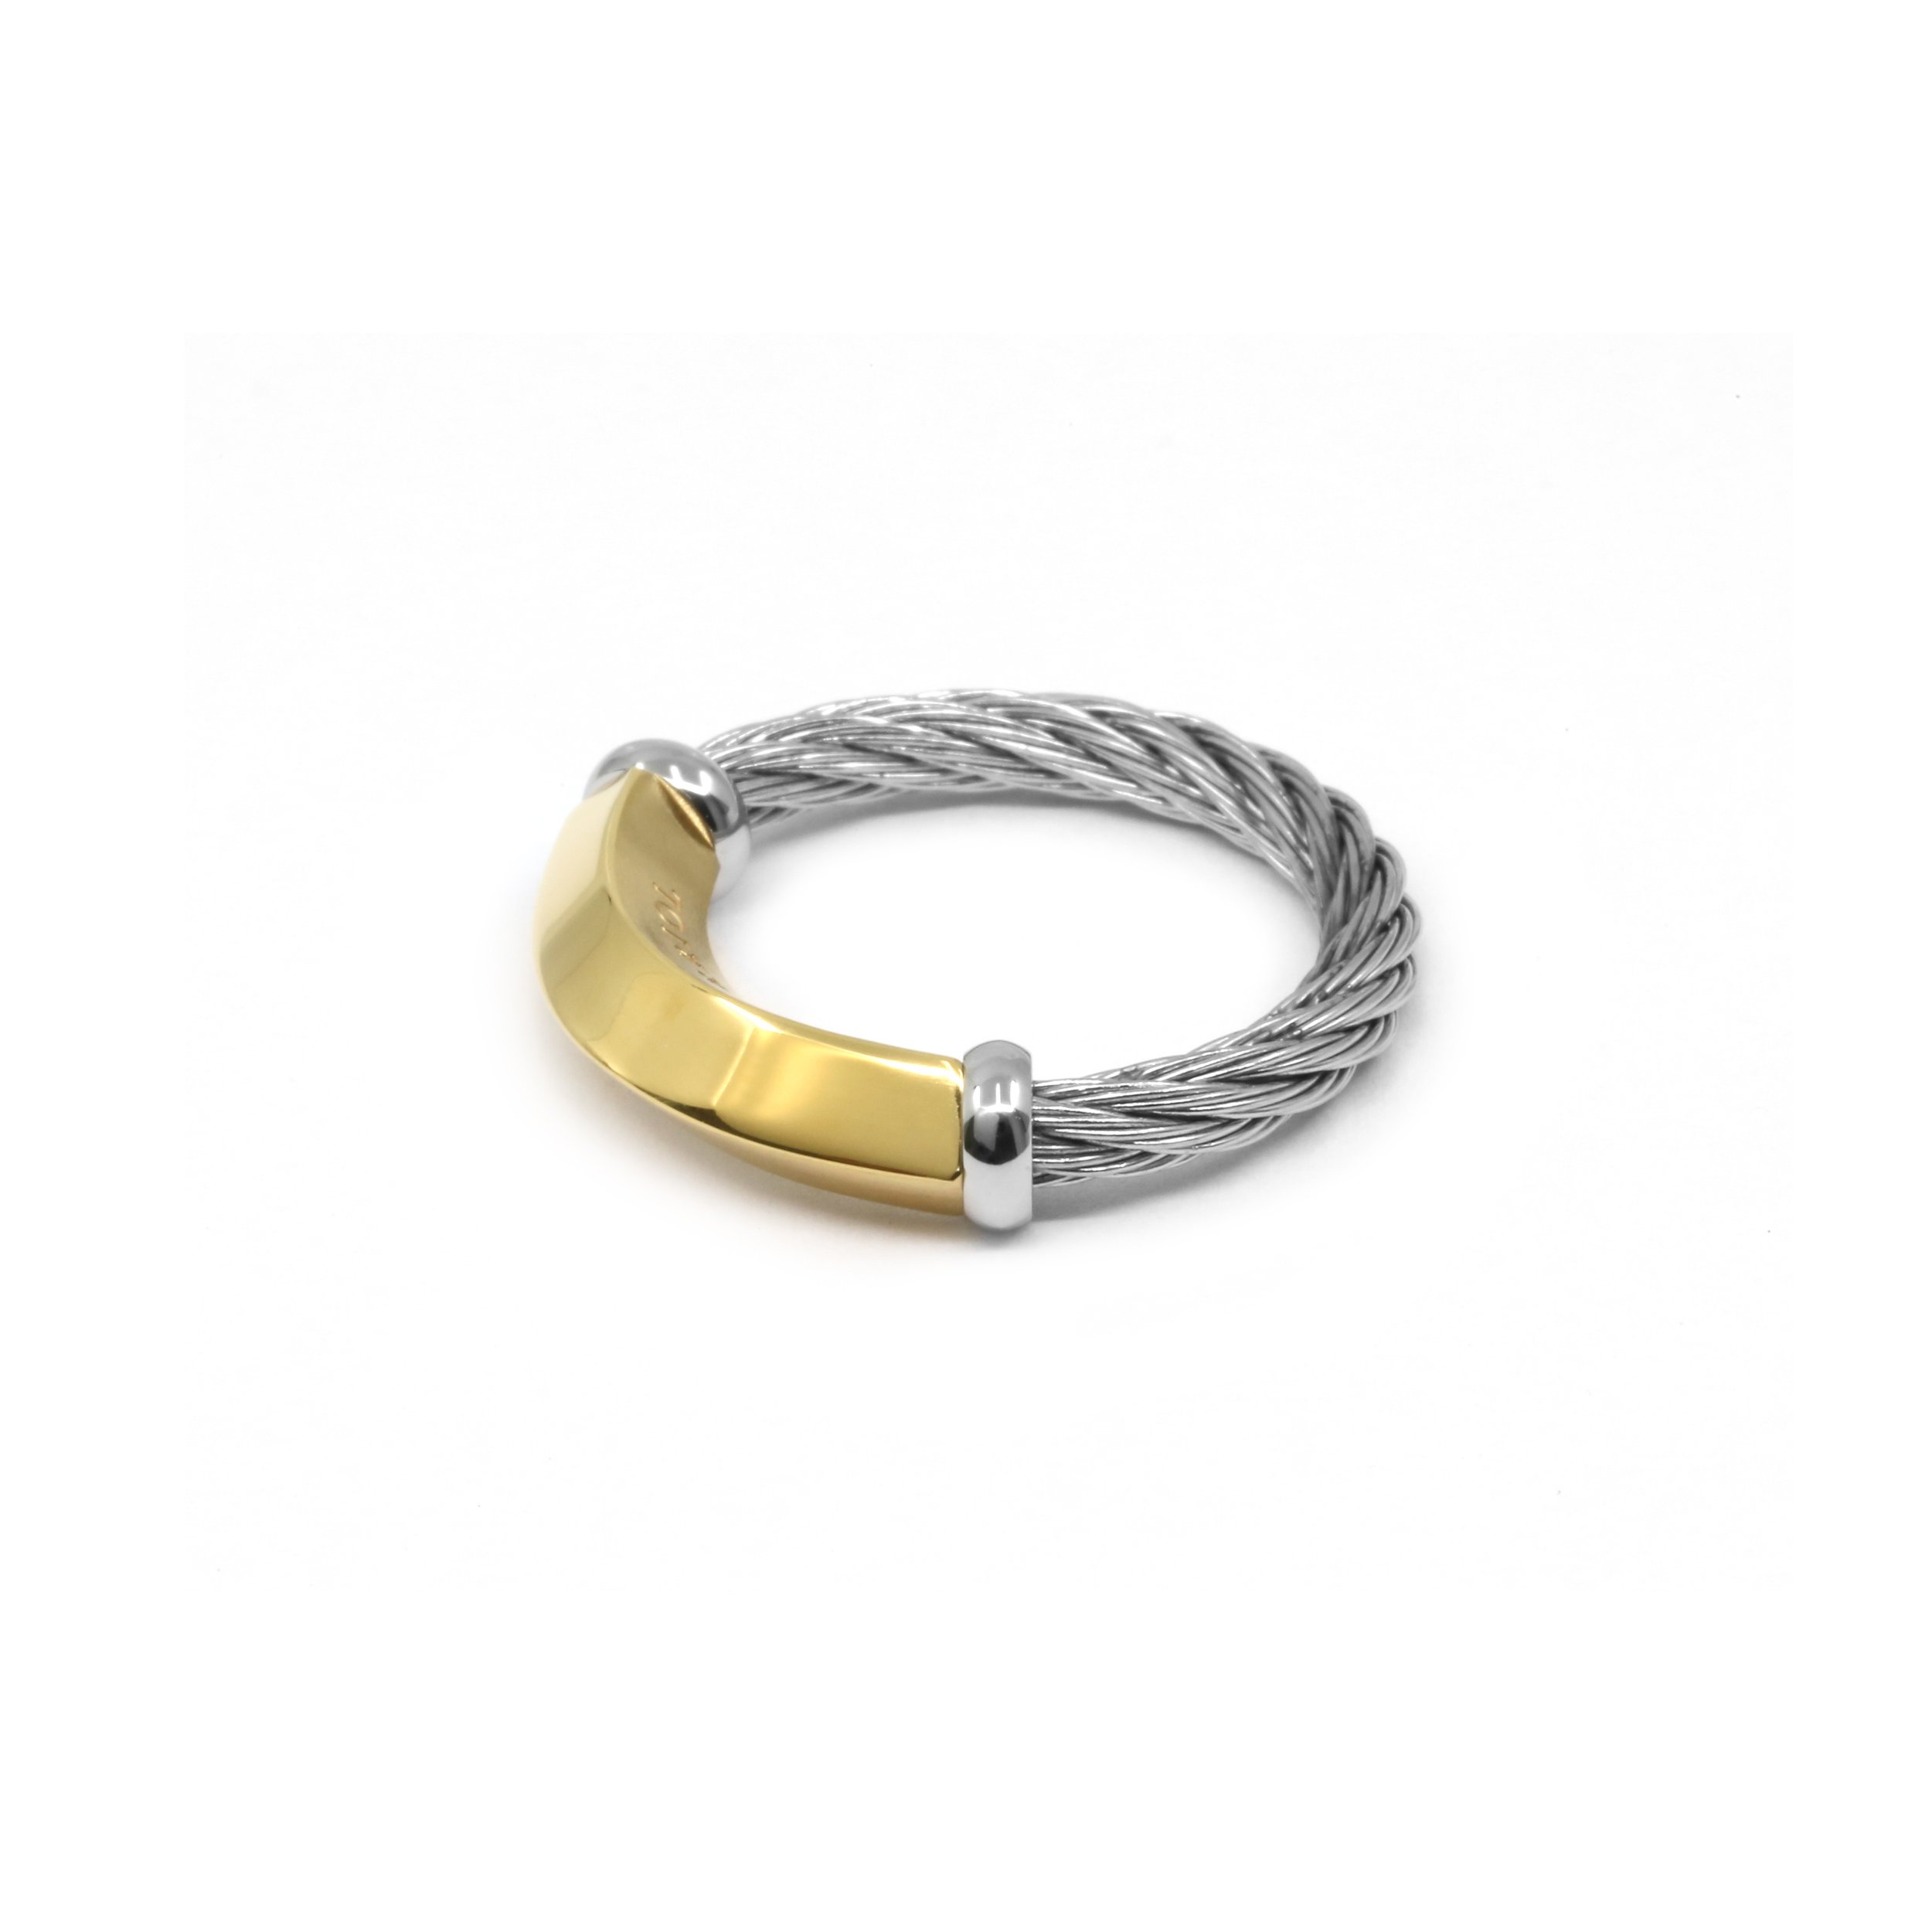 Better Half Ring - Yellow Gold Decor, Stainless Steel Cable.jpg